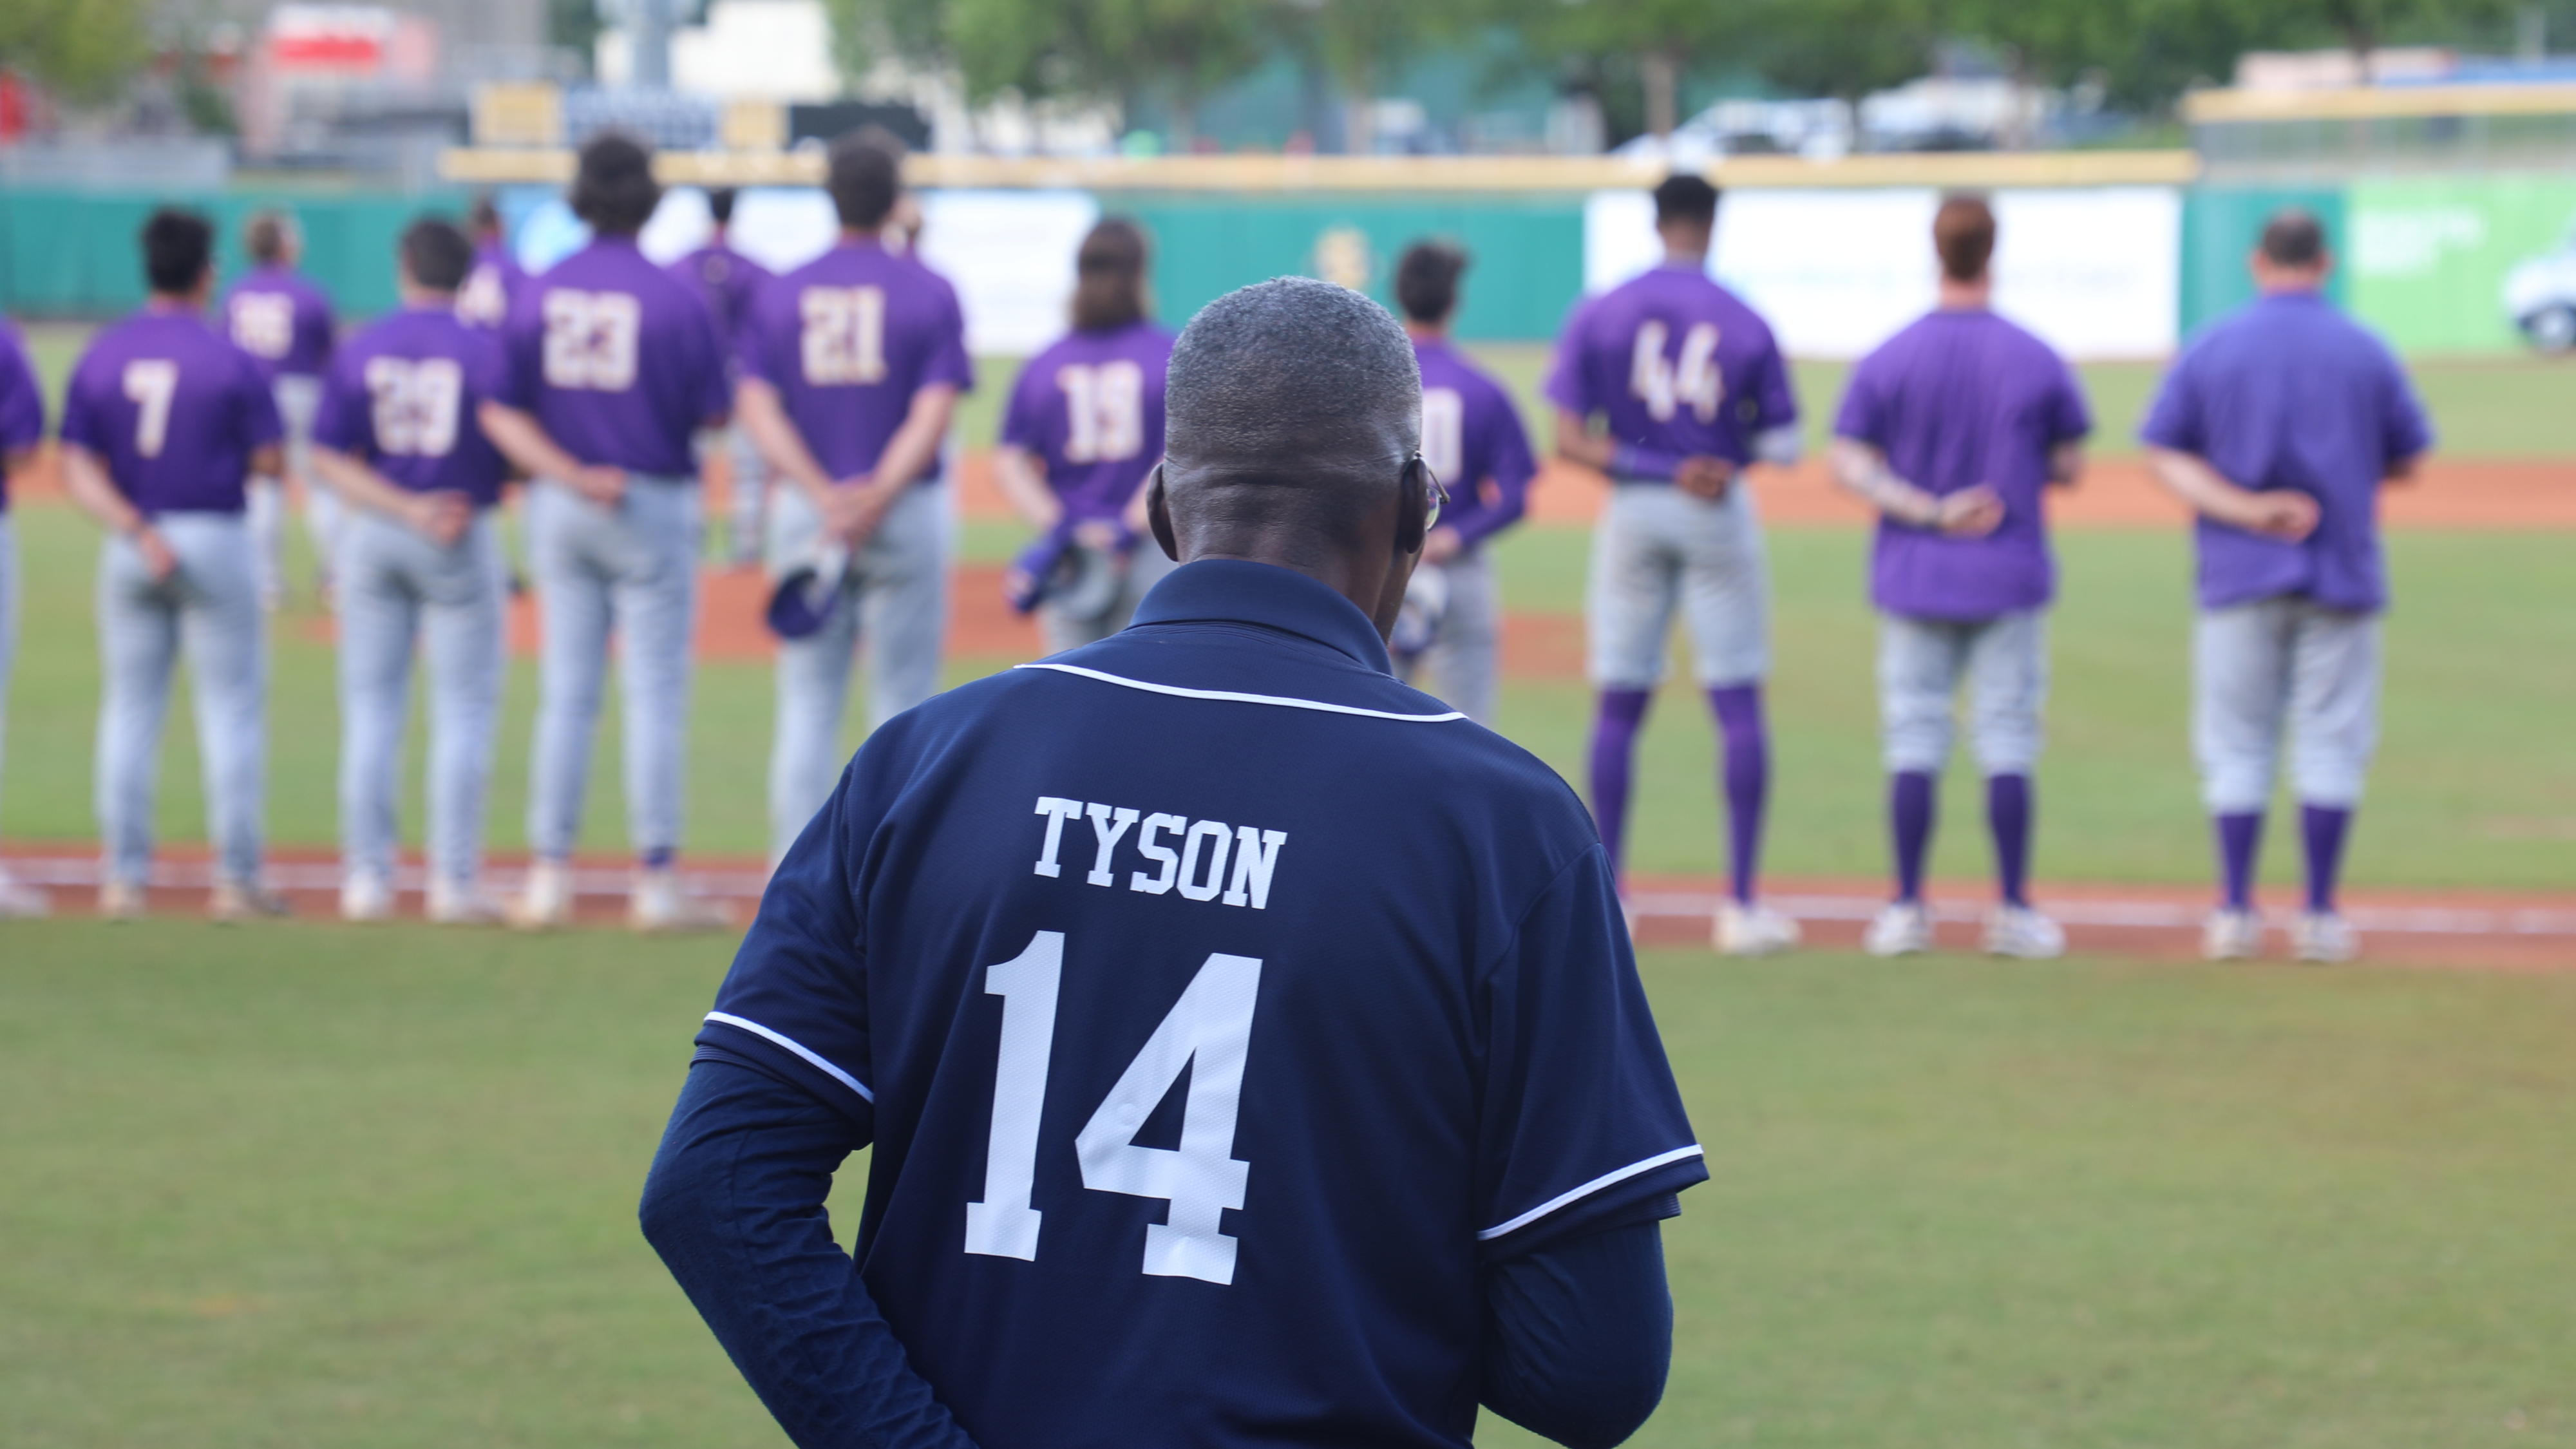 This is a photo of a player with Tyson labeled on the back of a jersey.